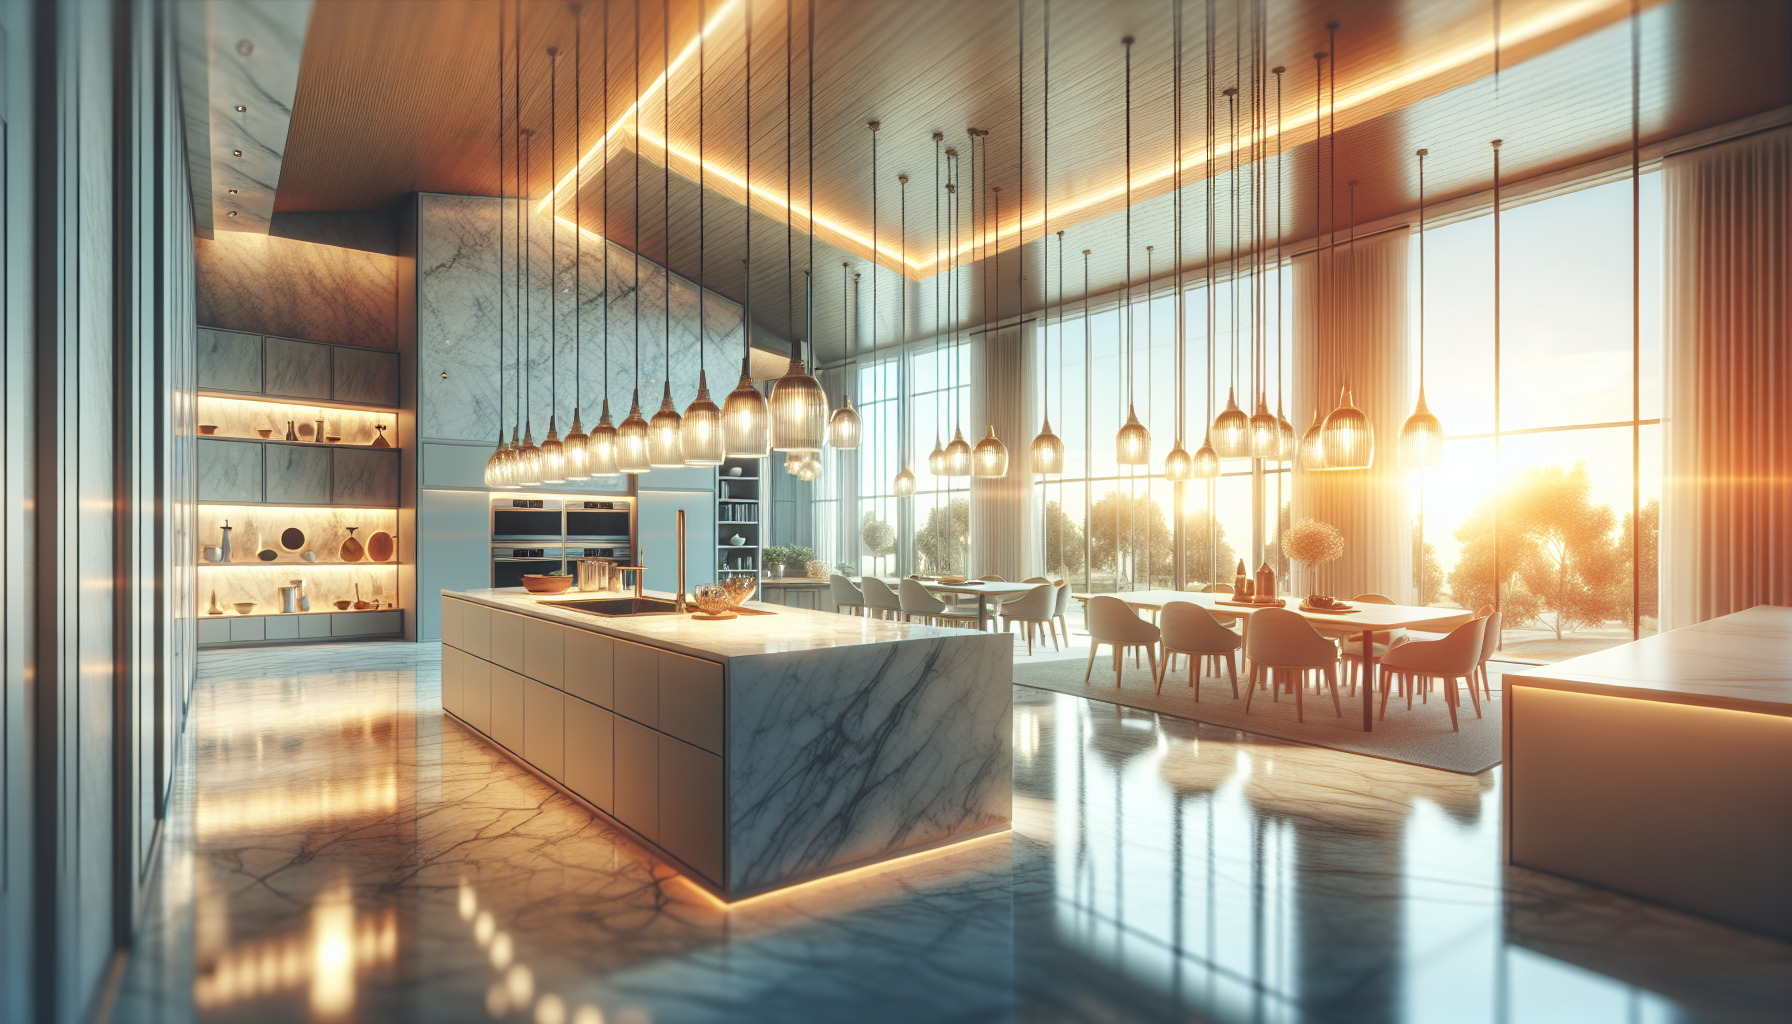 Artistic representation of a well-lit and spacious kitchen in a property